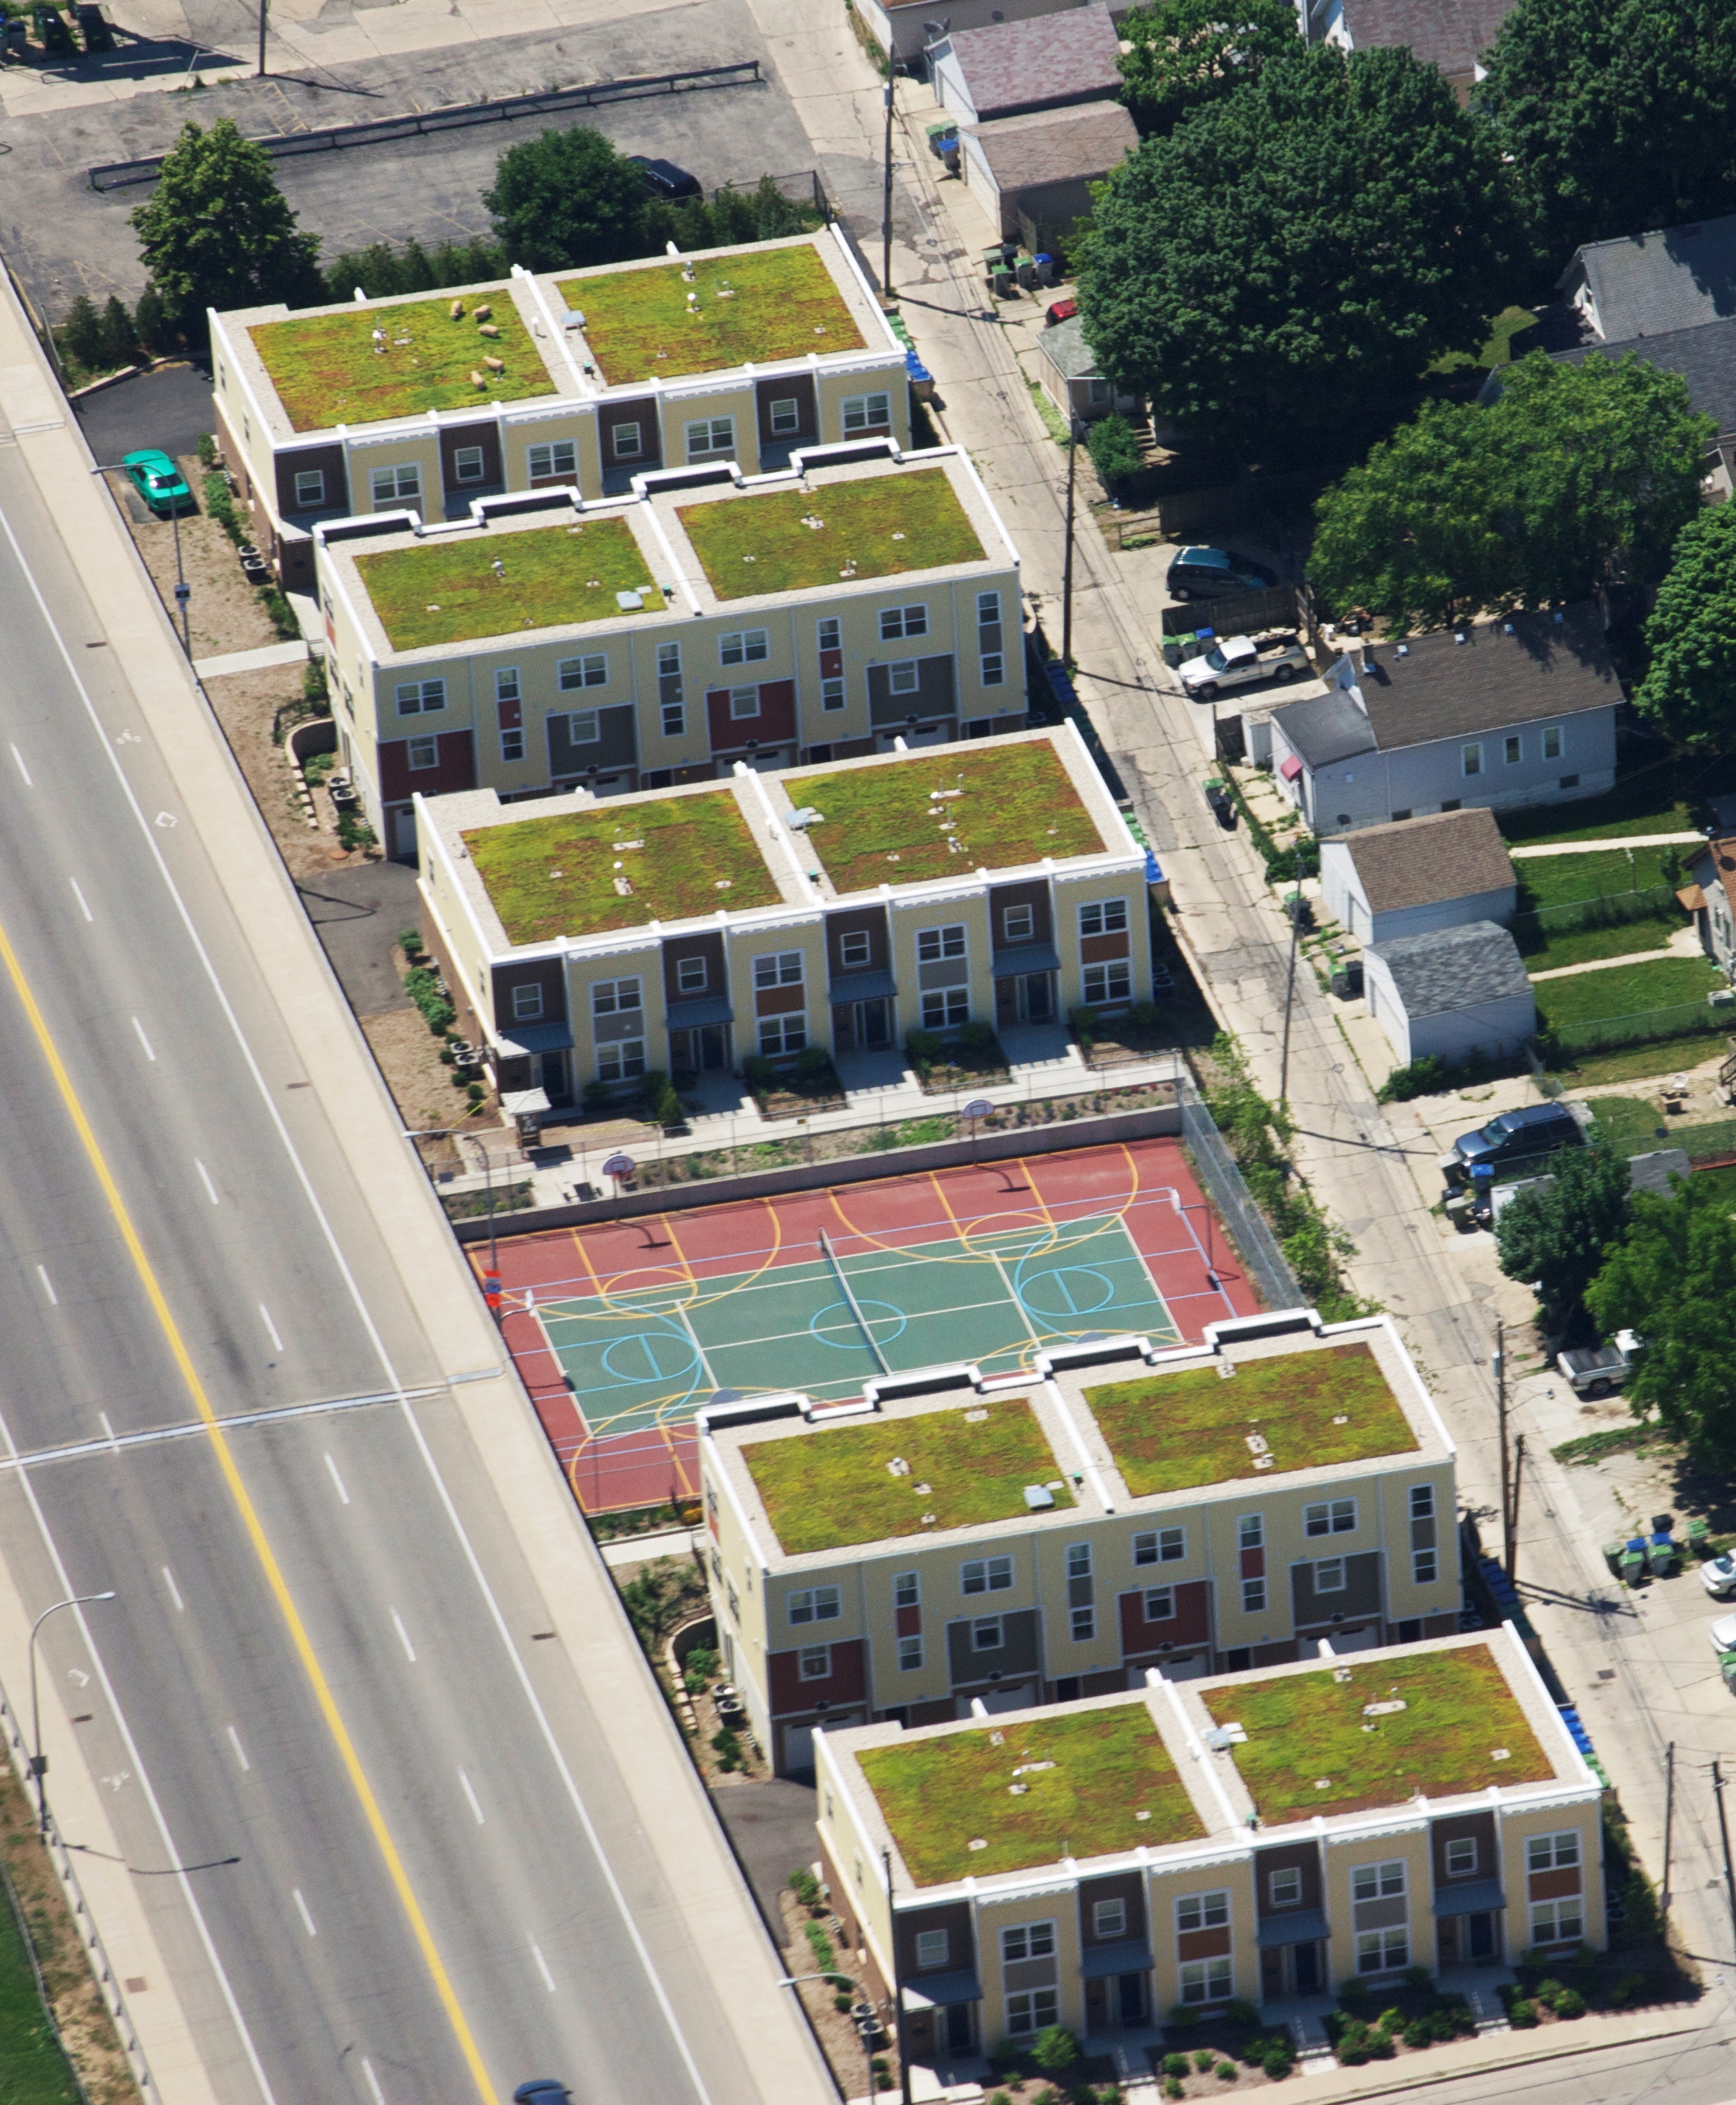 Xero Flor - Silver City Townhomes Green Roofs